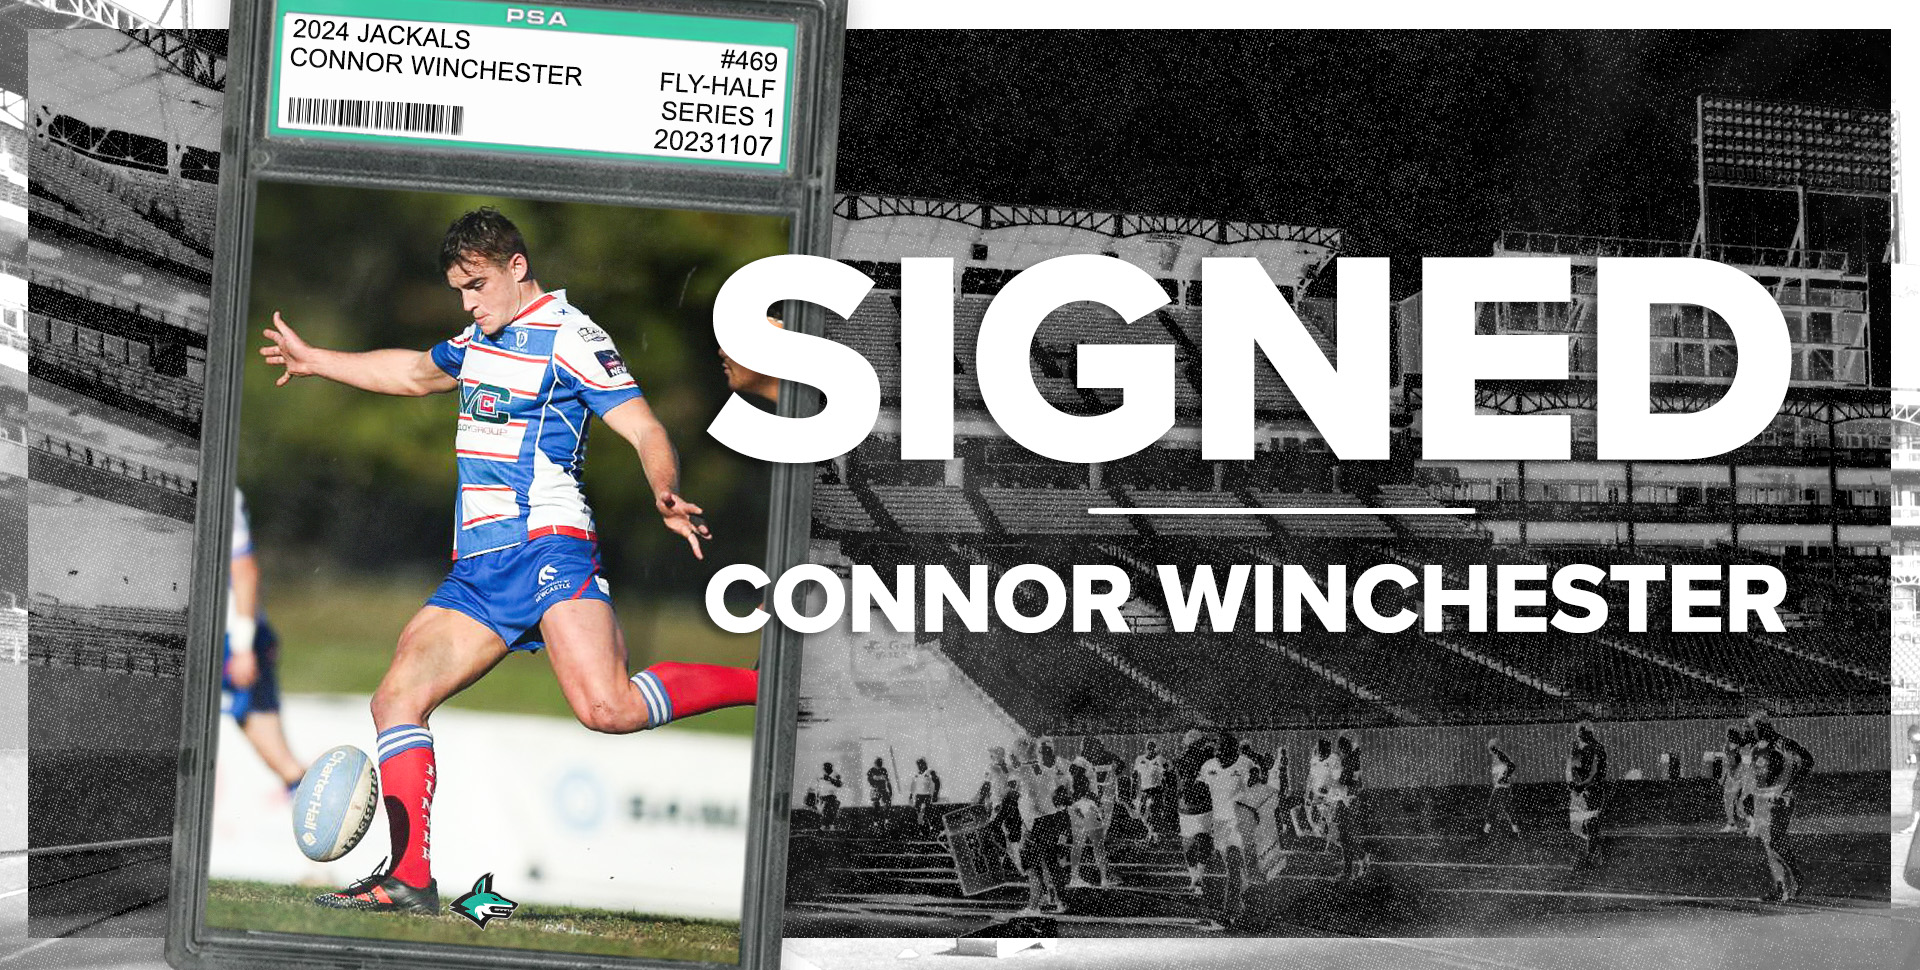 The Dallas Jackals Have Signed, Fly-half, Connor Winchester